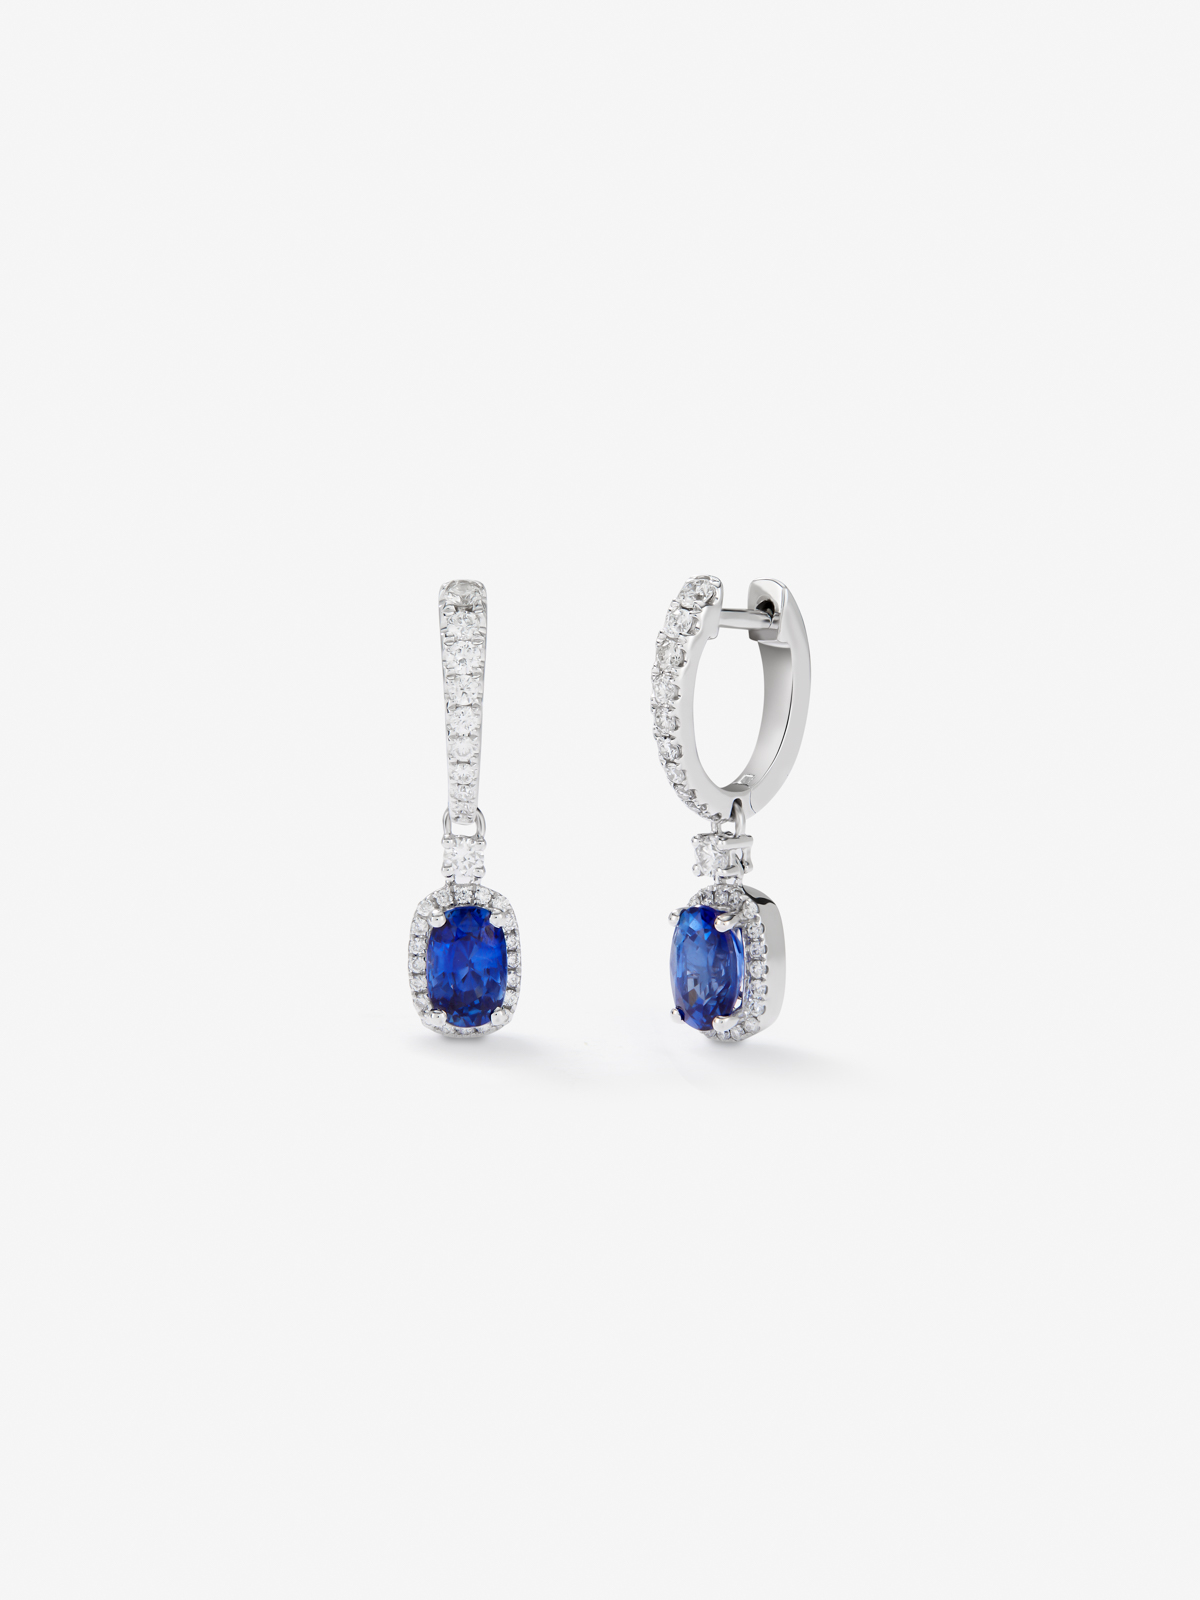 18K white gold earrings with blue zafiros in oval size 1.35 cts and white diamonds in 0.41 cts bright size